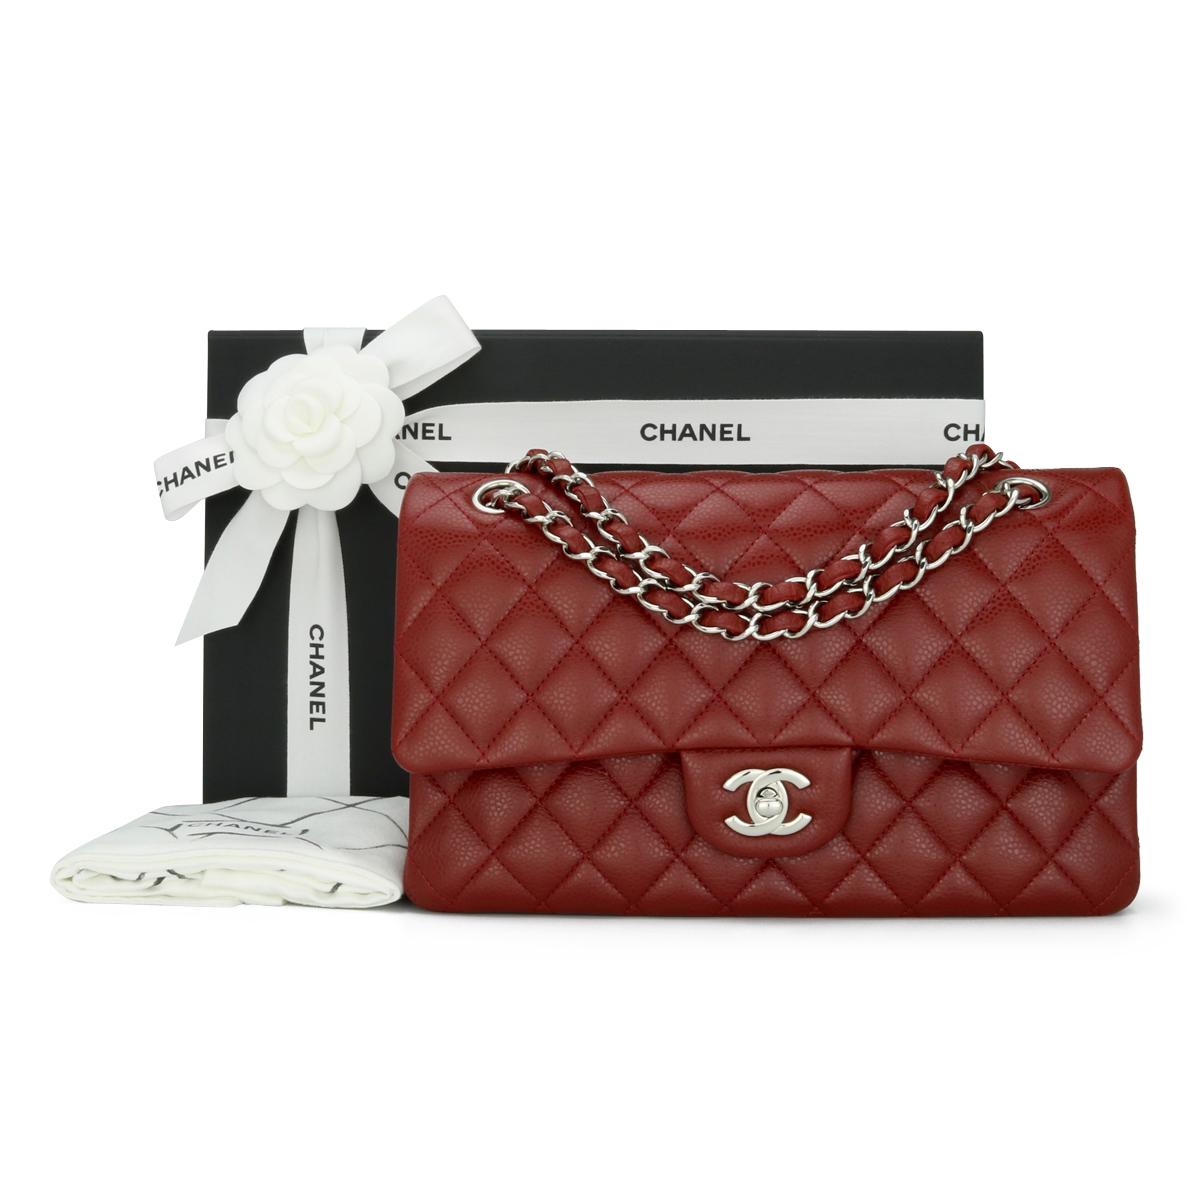 CHANEL Classic Double Flap Bag Medium in Dark Red Caviar with Silver-Tone Hardware 2013 – 13B.

This stunning bag is still in immaculate condition; the bag still holds its original shape, and the hardware is very shiny. Leather still smells fresh,